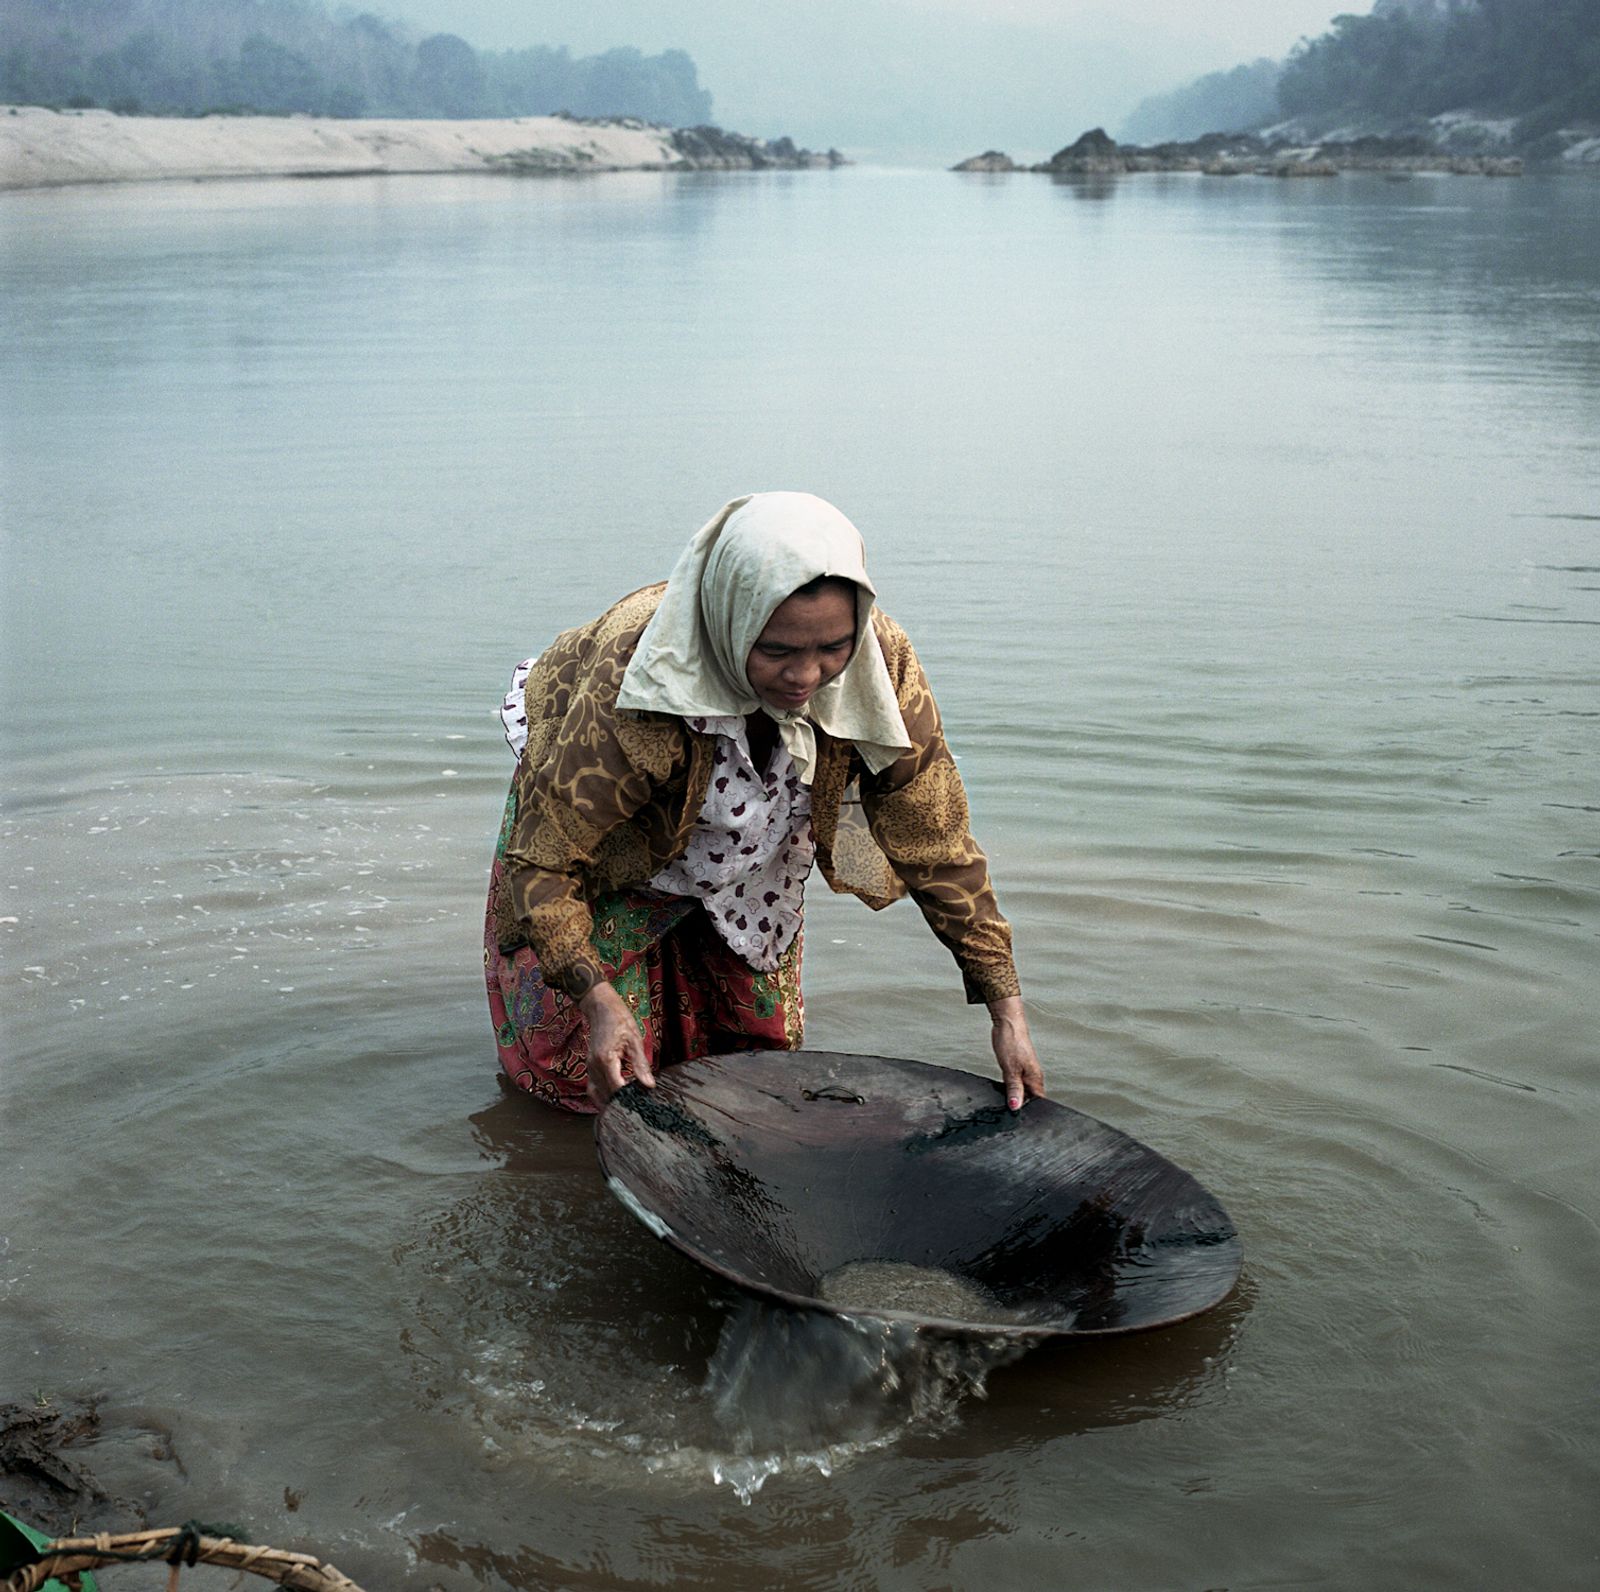 © Huiying Ore - Villager Ngoi, 63 years old, pans for gold along the Mekong riverbank.